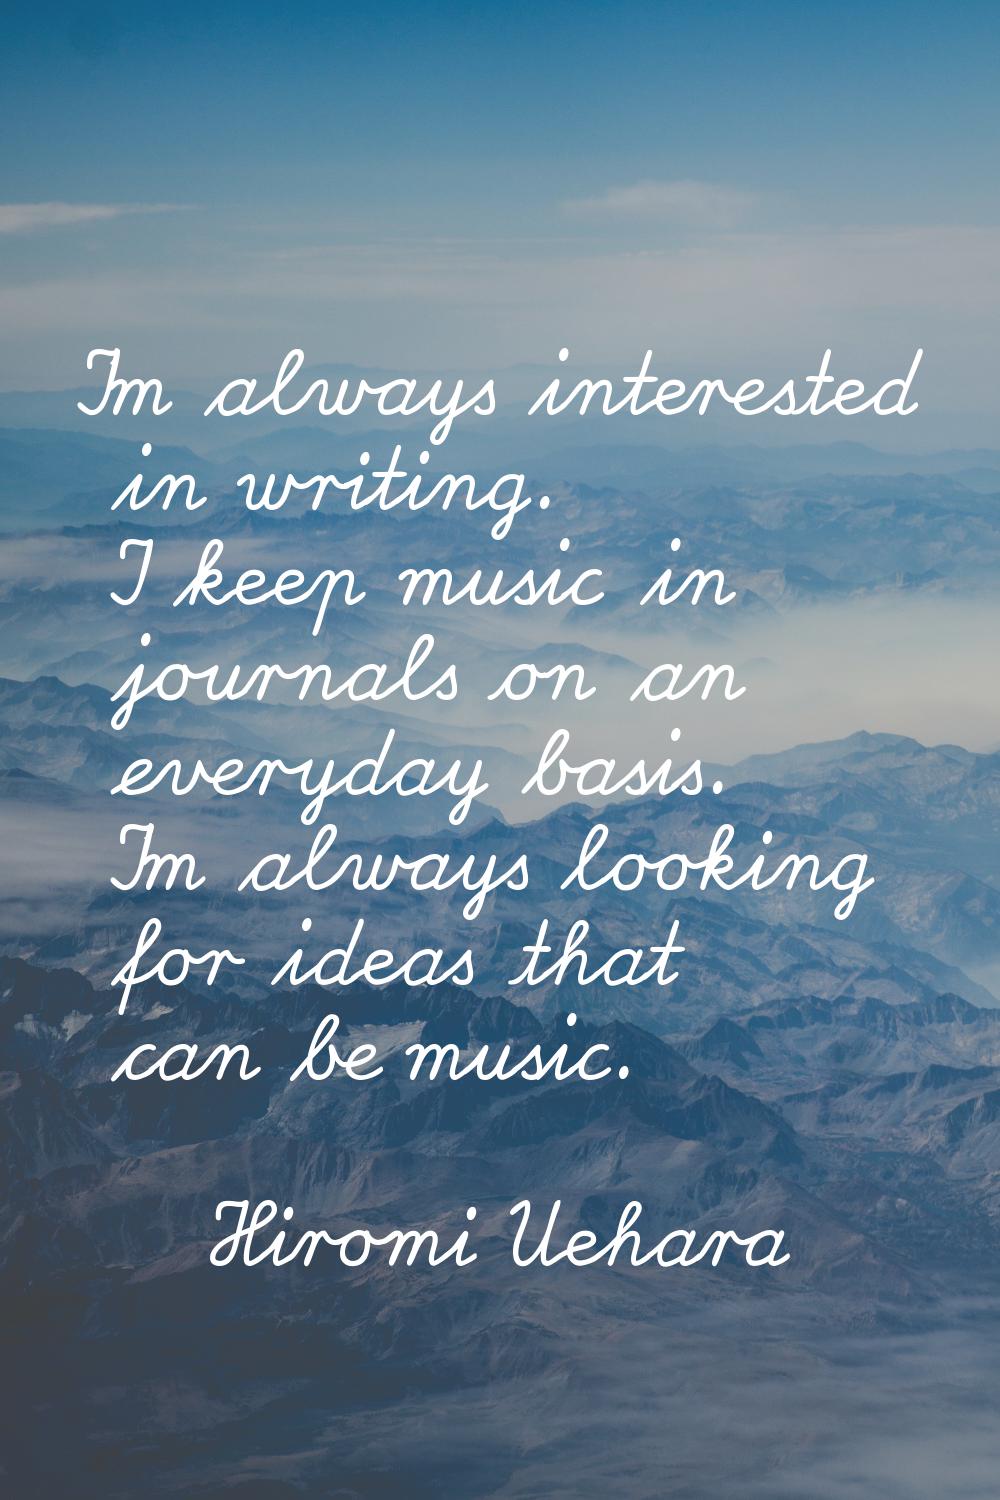 I'm always interested in writing. I keep music in journals on an everyday basis. I'm always looking